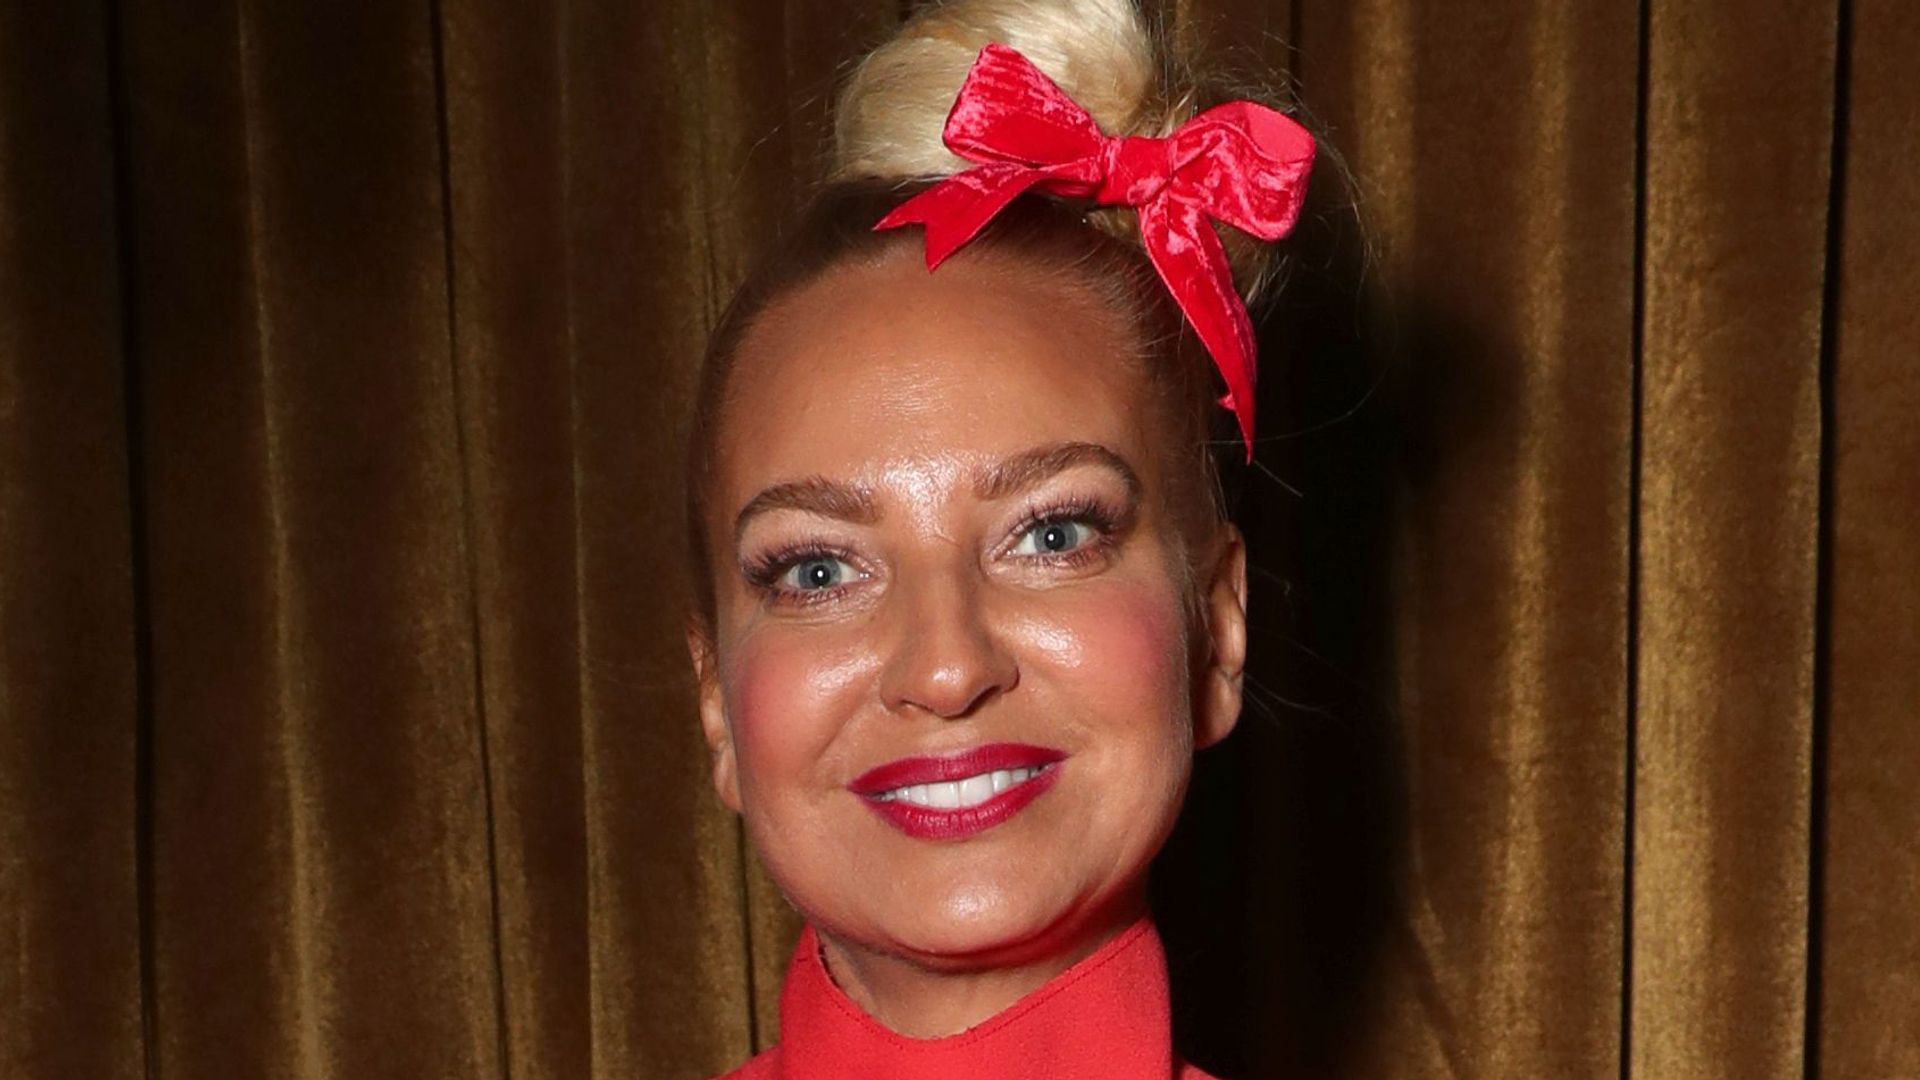 Sia wearing a red dress and a hair bow